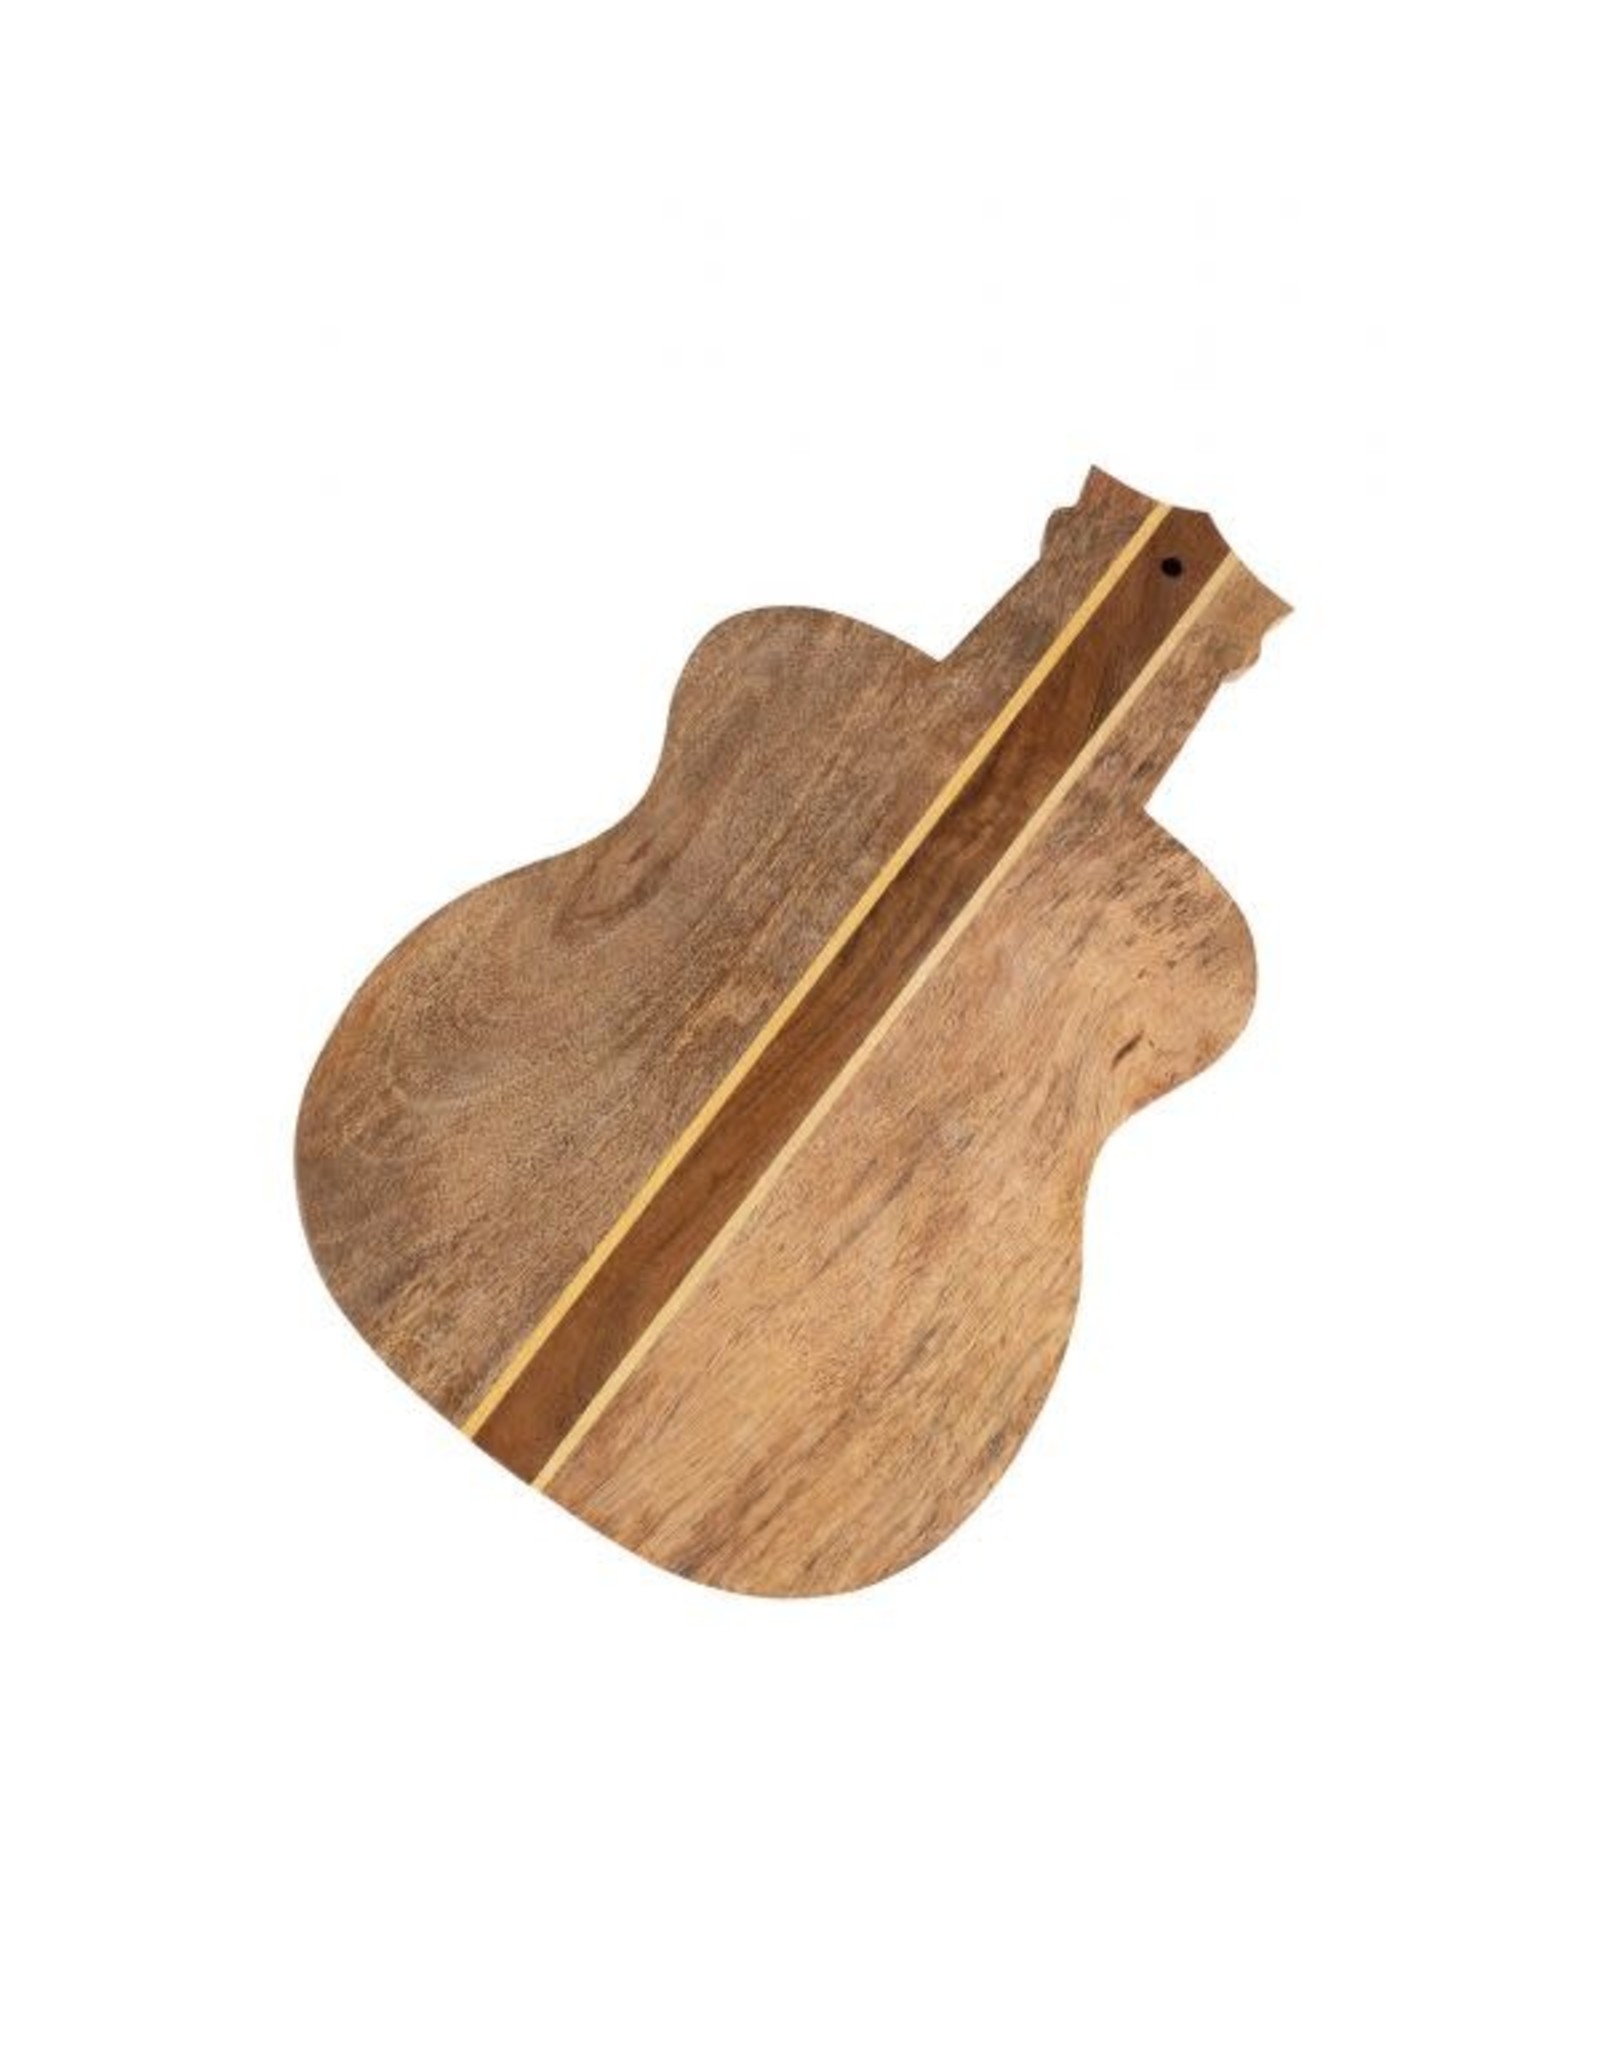 Trade roots Guitar Serving Board, India